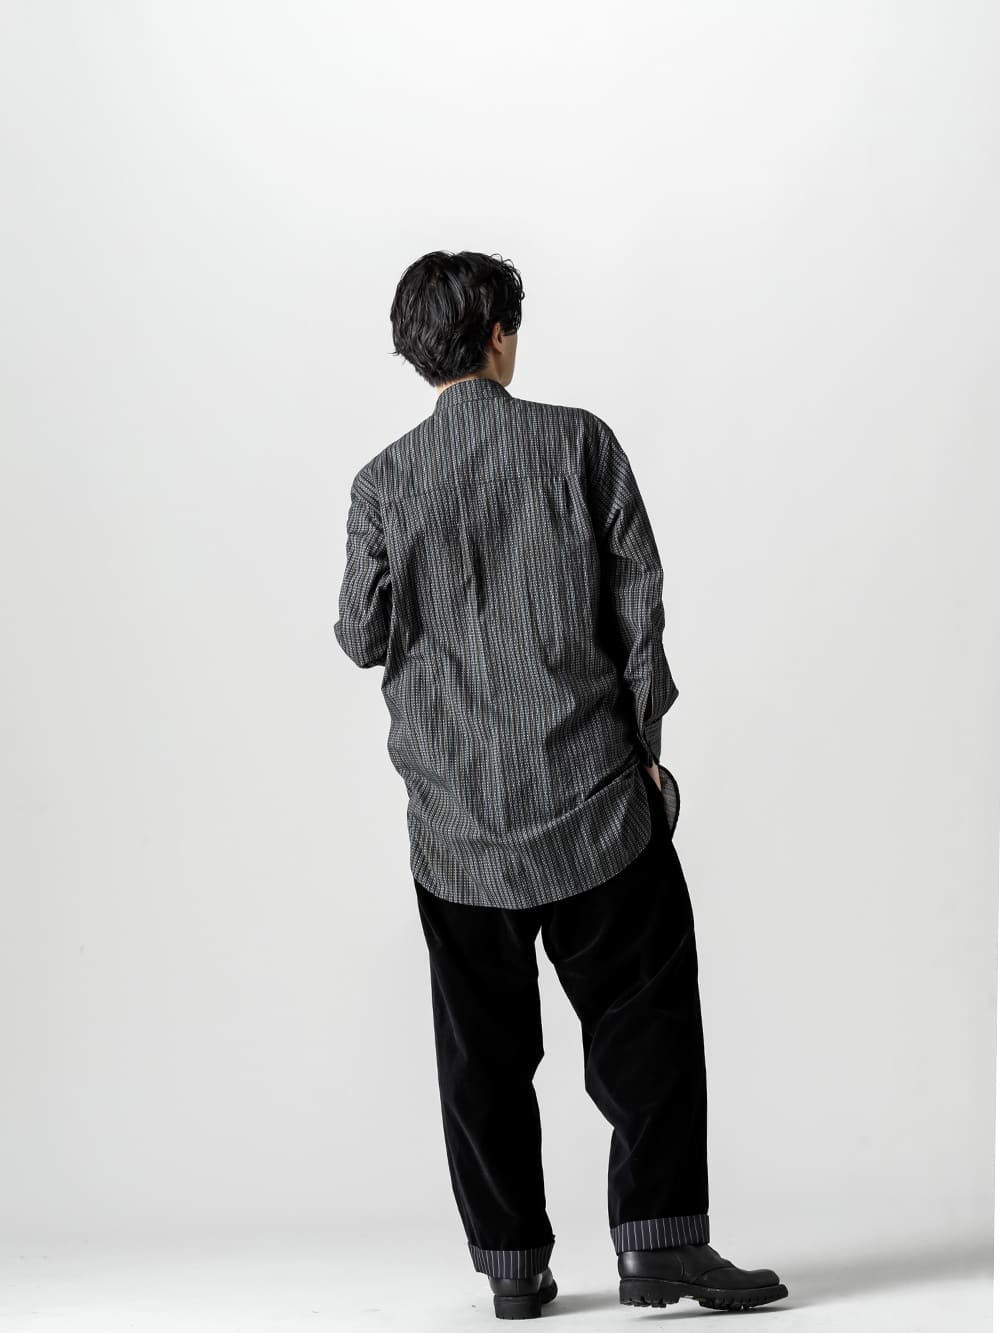 New Arrivals] Yohji Yamamoto 22-23AW Collection is in stock now